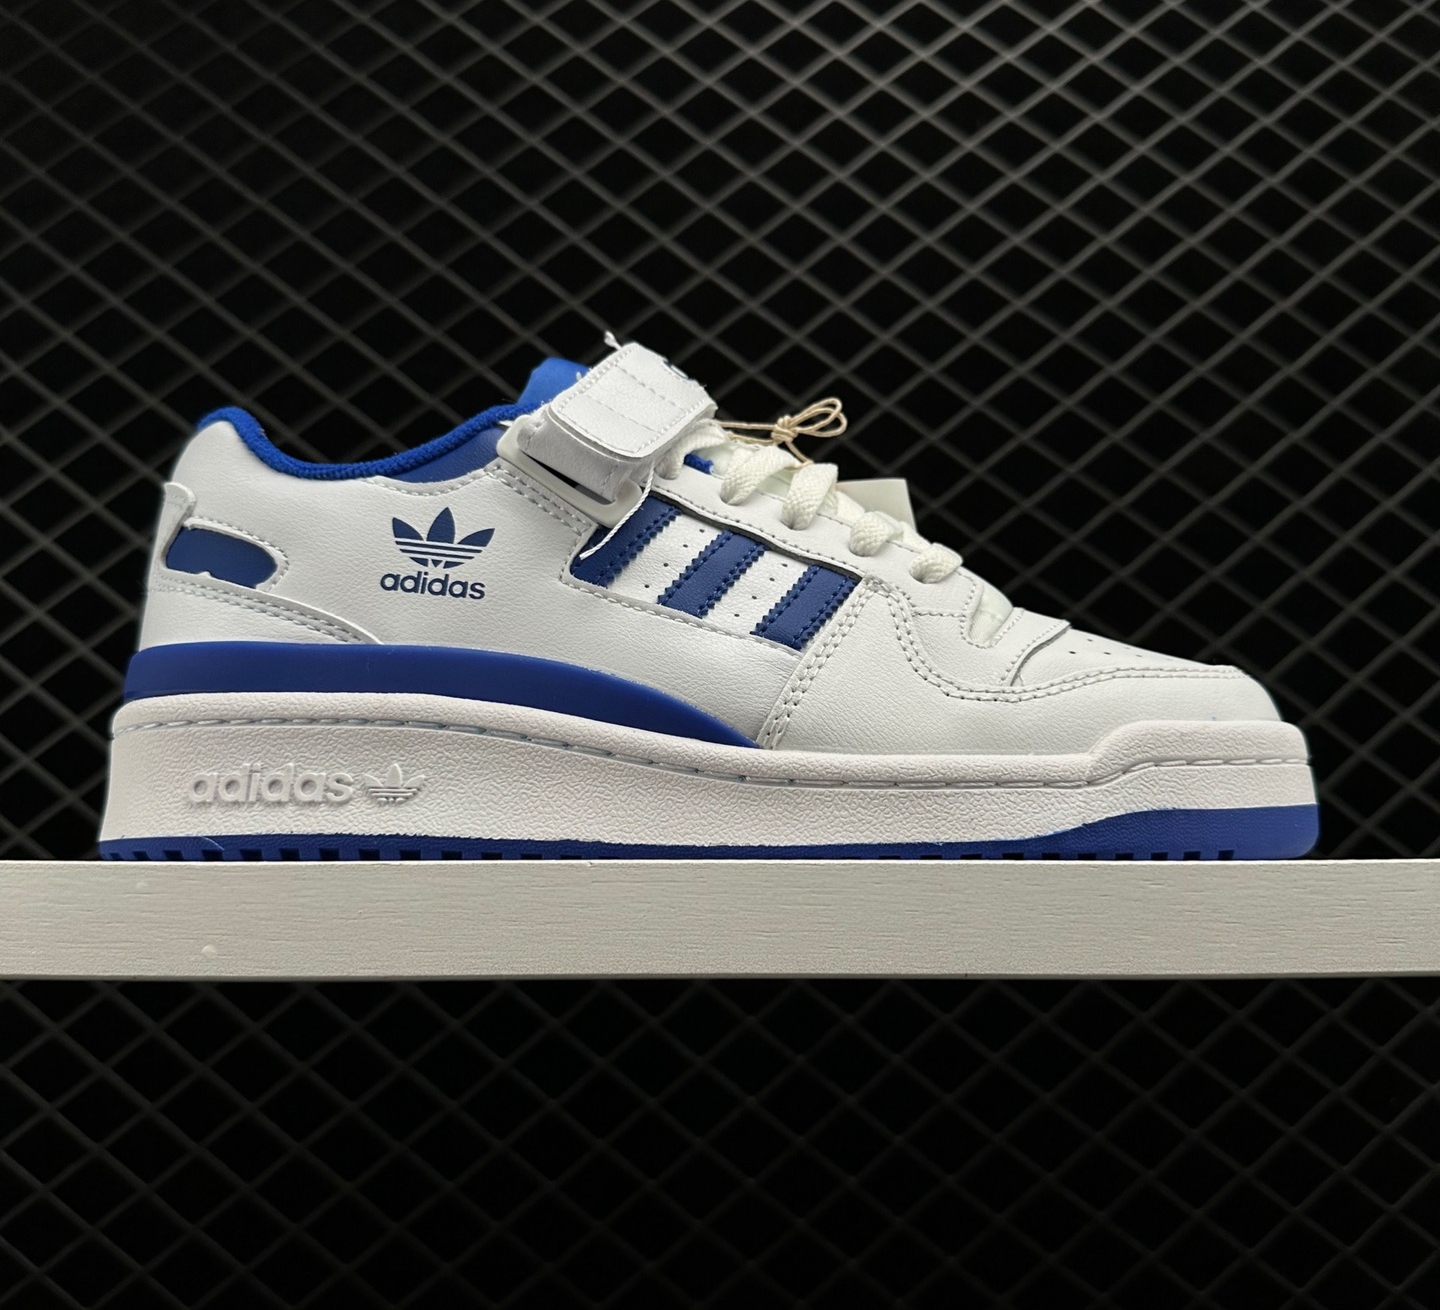 Adidas Forum Low 'White Royal Blue' FY7756 - Classic Style and Fresh Colors